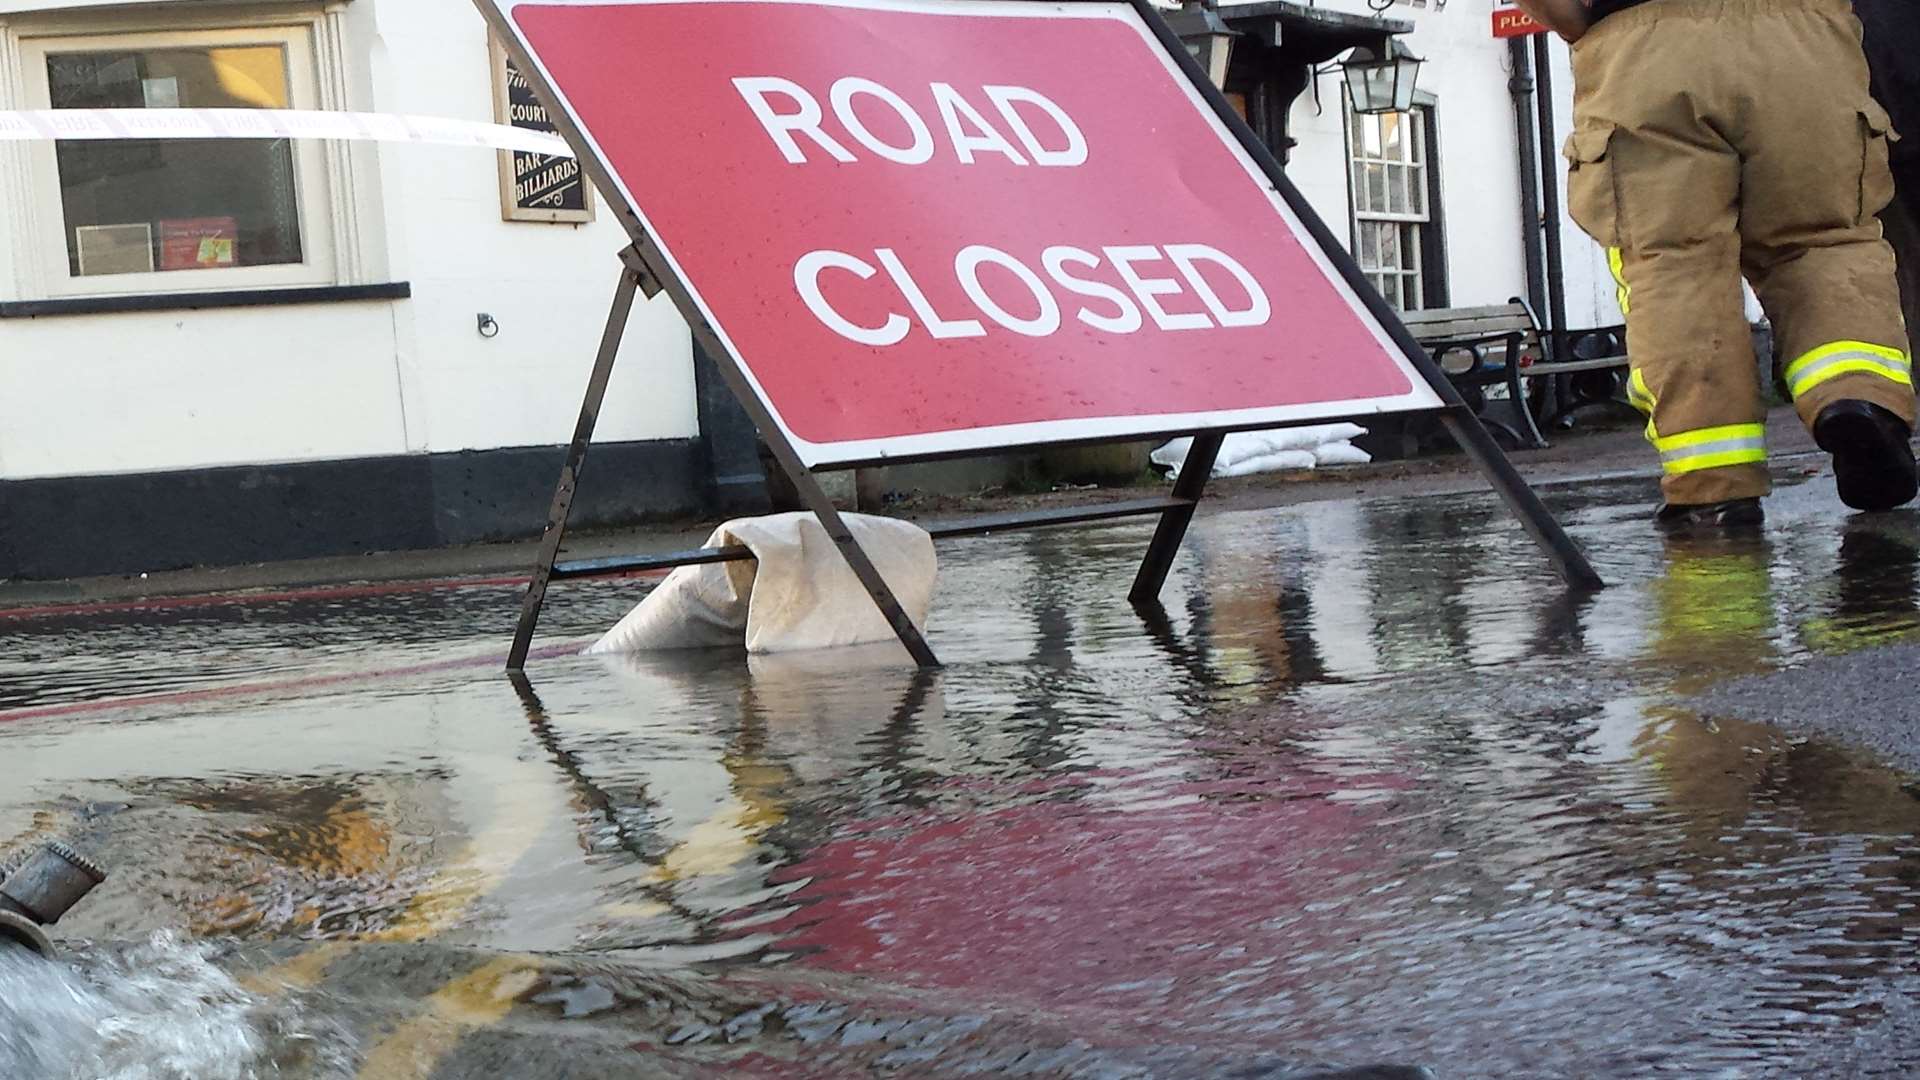 Roads are closed due to flooding. Library image.